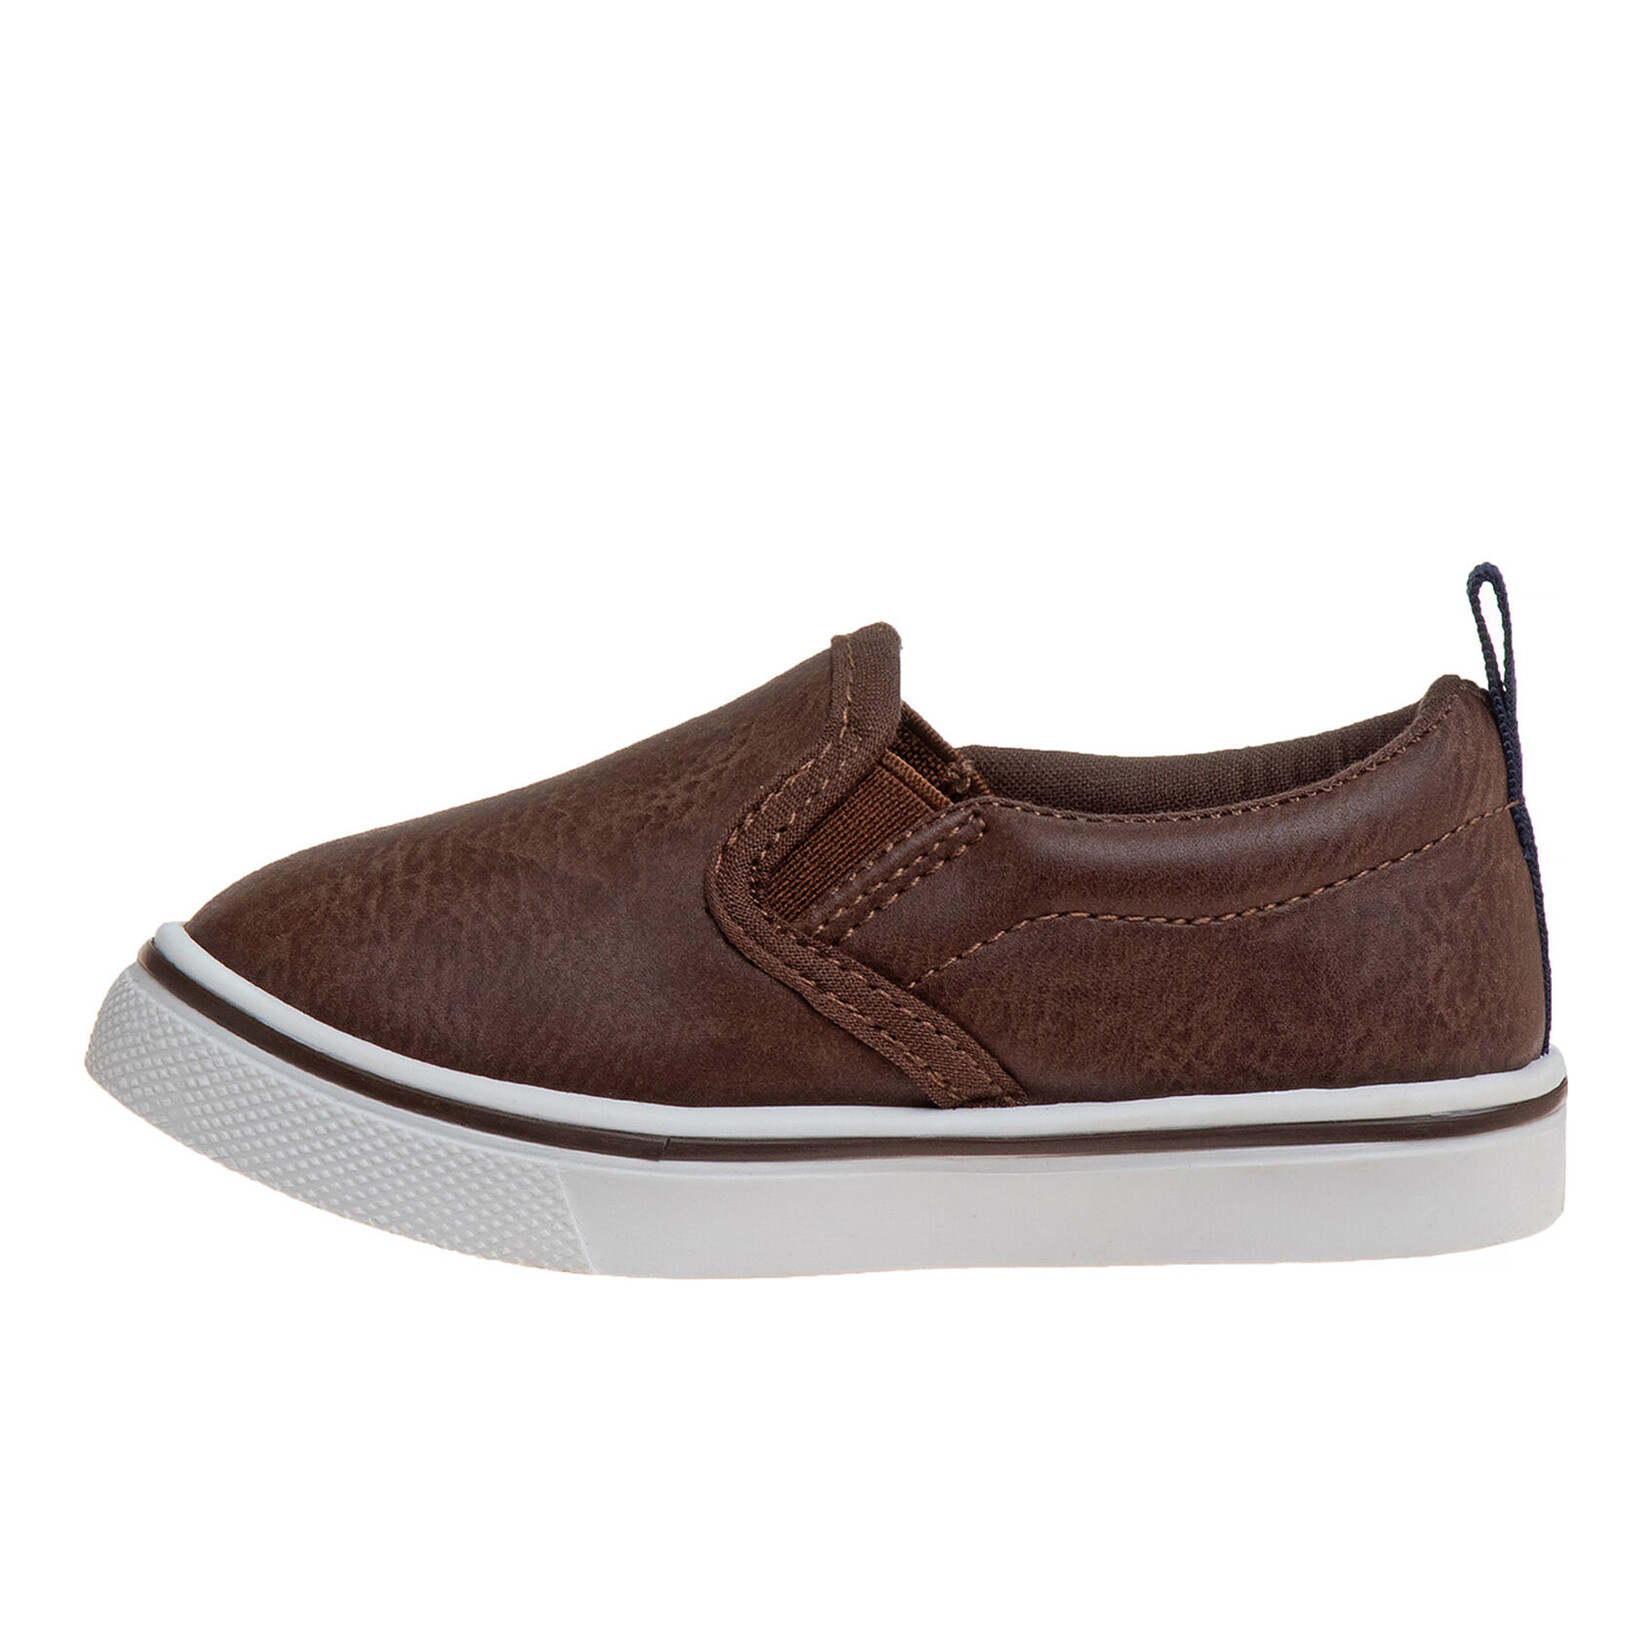 Beverly Hills Polo Club Boys Slip-On Canvas Sneakers - BH89913H